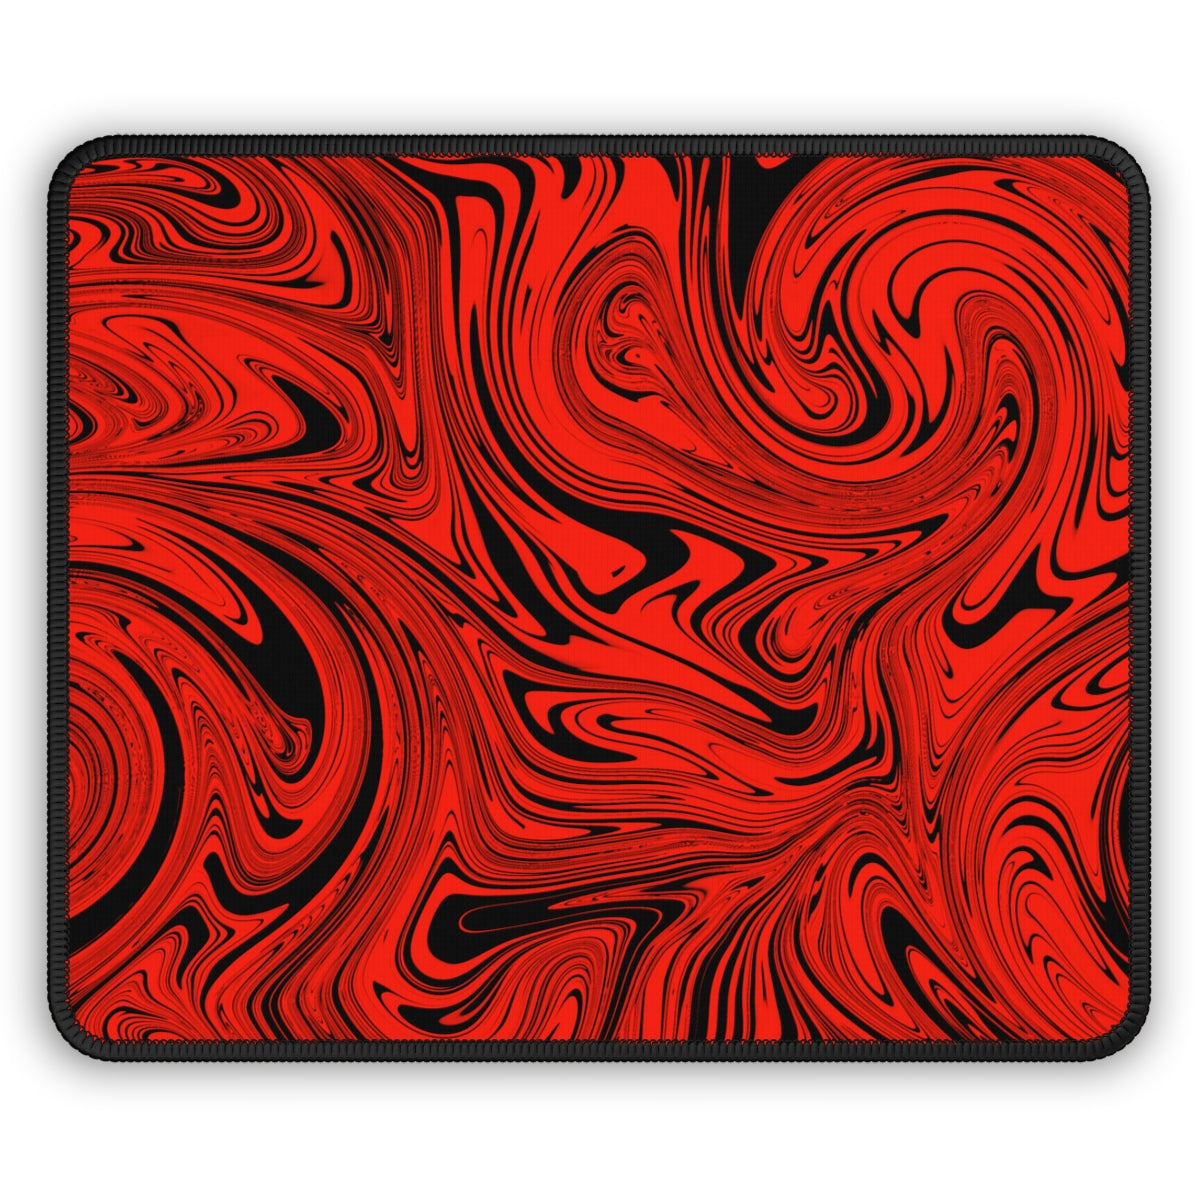 Black & Red Swirl Gaming Mouse Pad - Desk Cookies